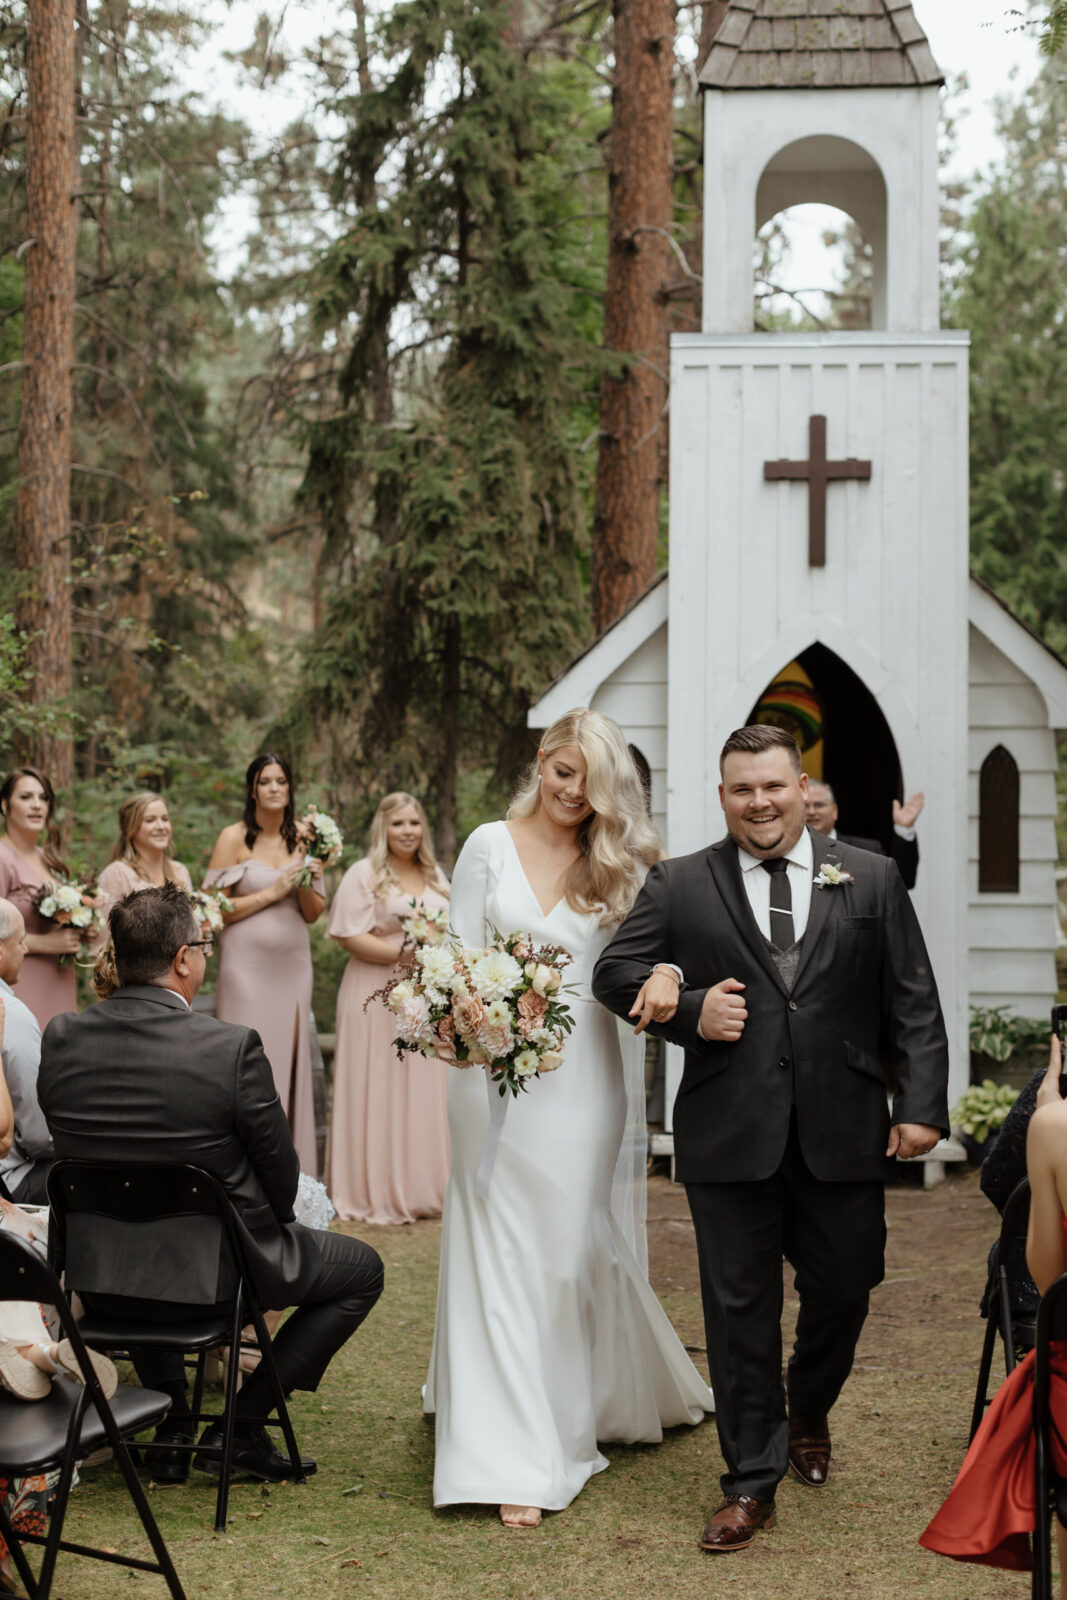 Bride and groom celebrate after their wedding ceremony in the heart of Okanagan wine country